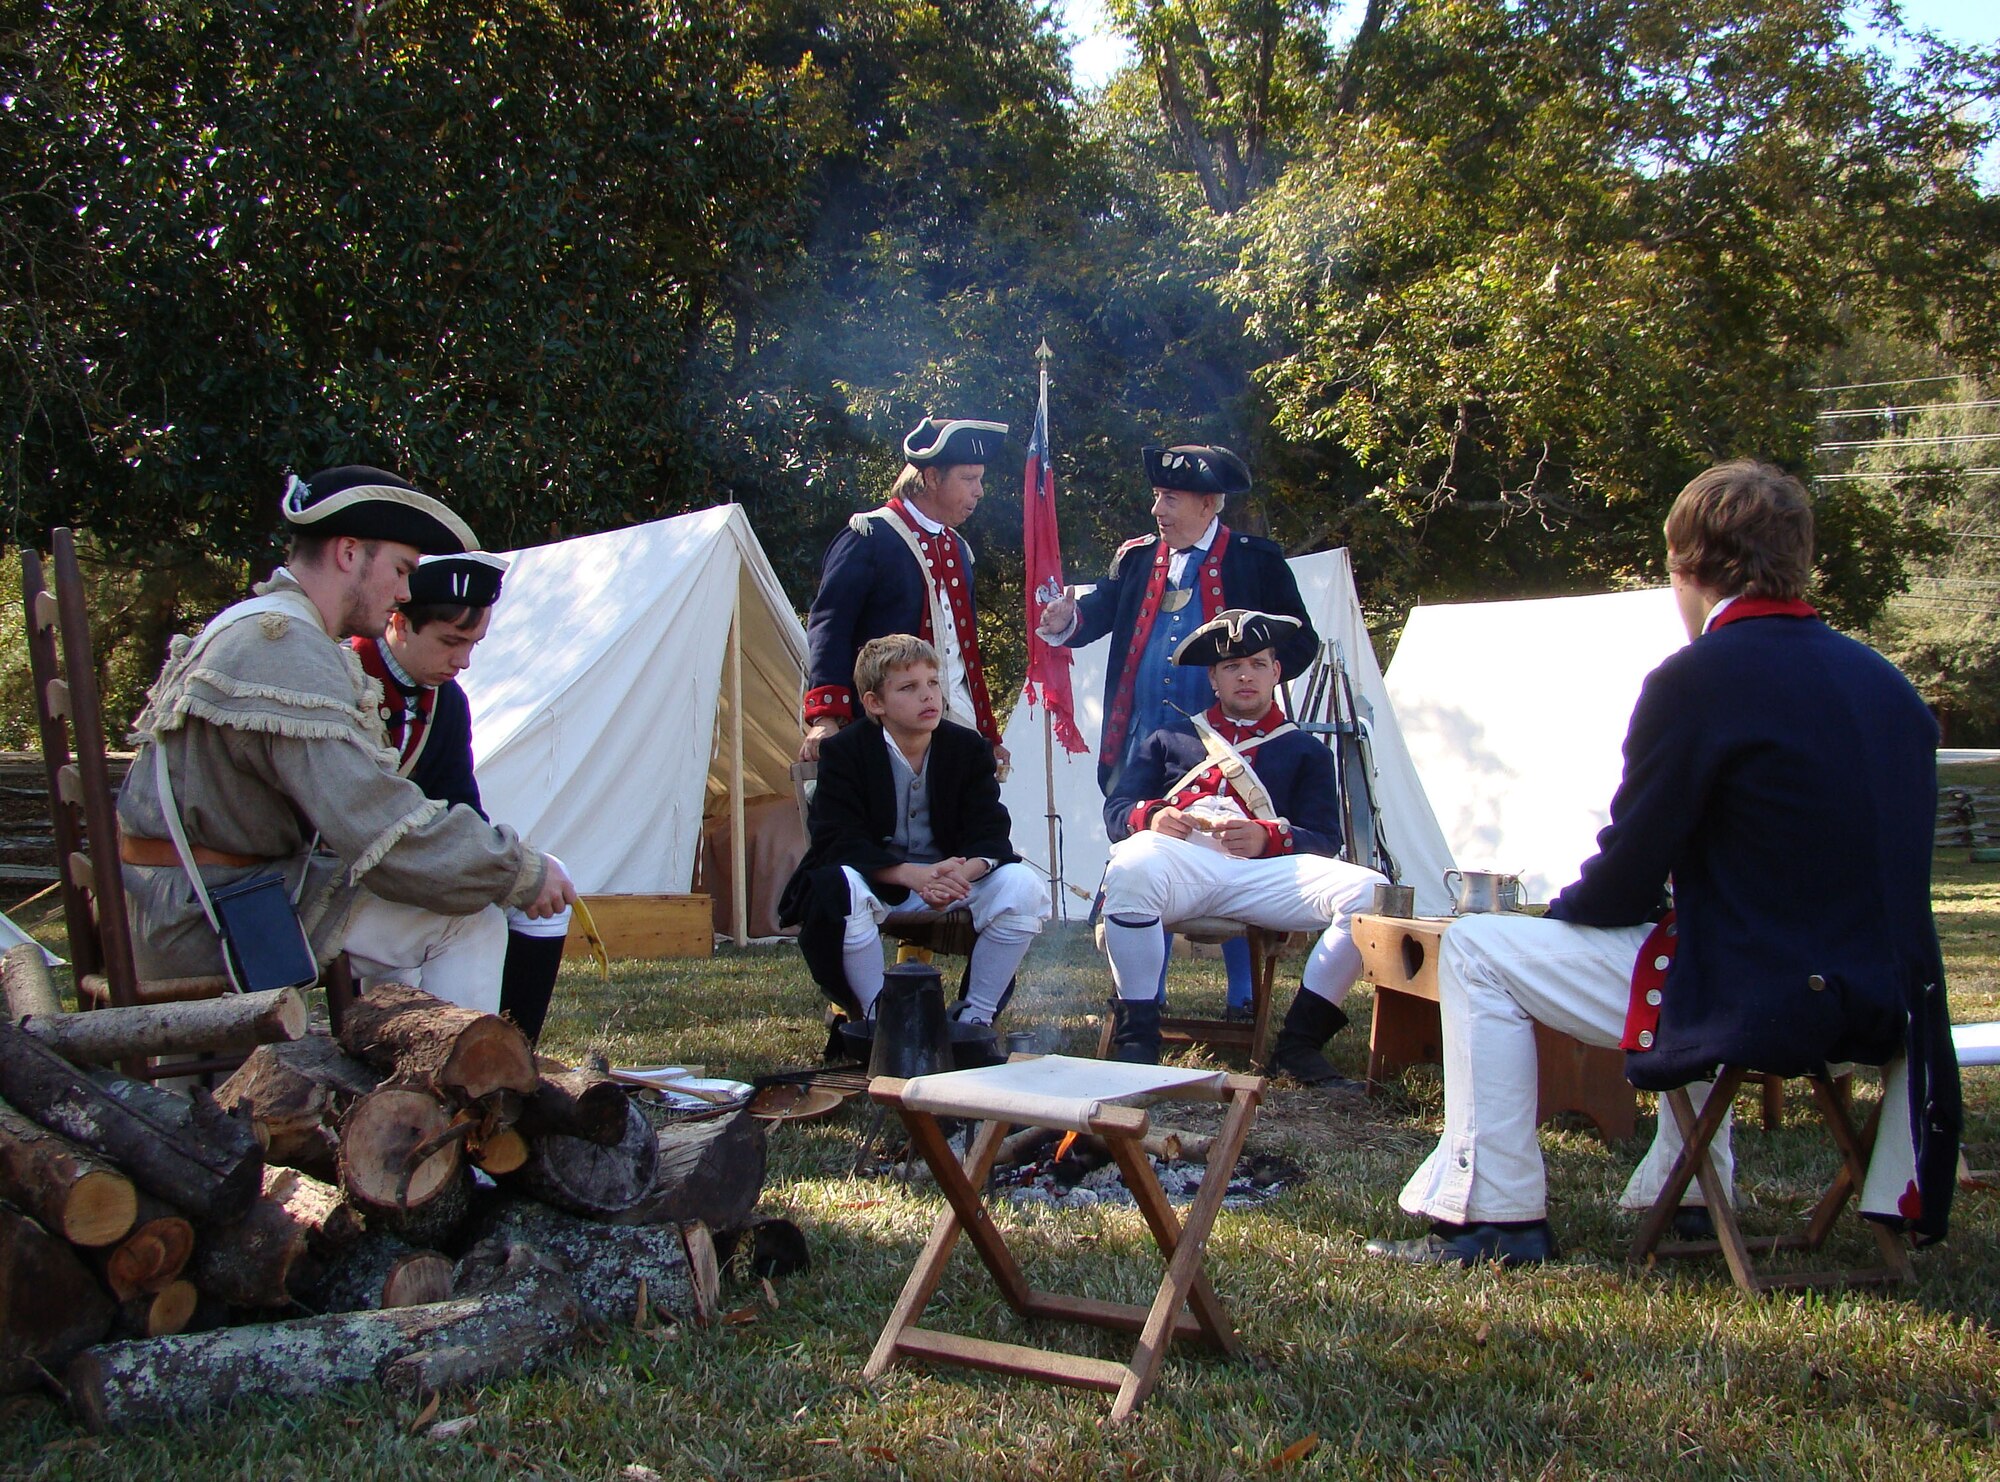 Portraying soldiers of the American colonies, men and teens relax in their camp before the Battle of Camden re-enactment about 25 miles north of Shaw Air Force Base, at Camden, S.C., Nov. 3, 2012. More than 200 actors, including many military veterans, brought the battlefield back to life 232 years after the event. (U.S. Air Force photo by Rob Sexton/Released)